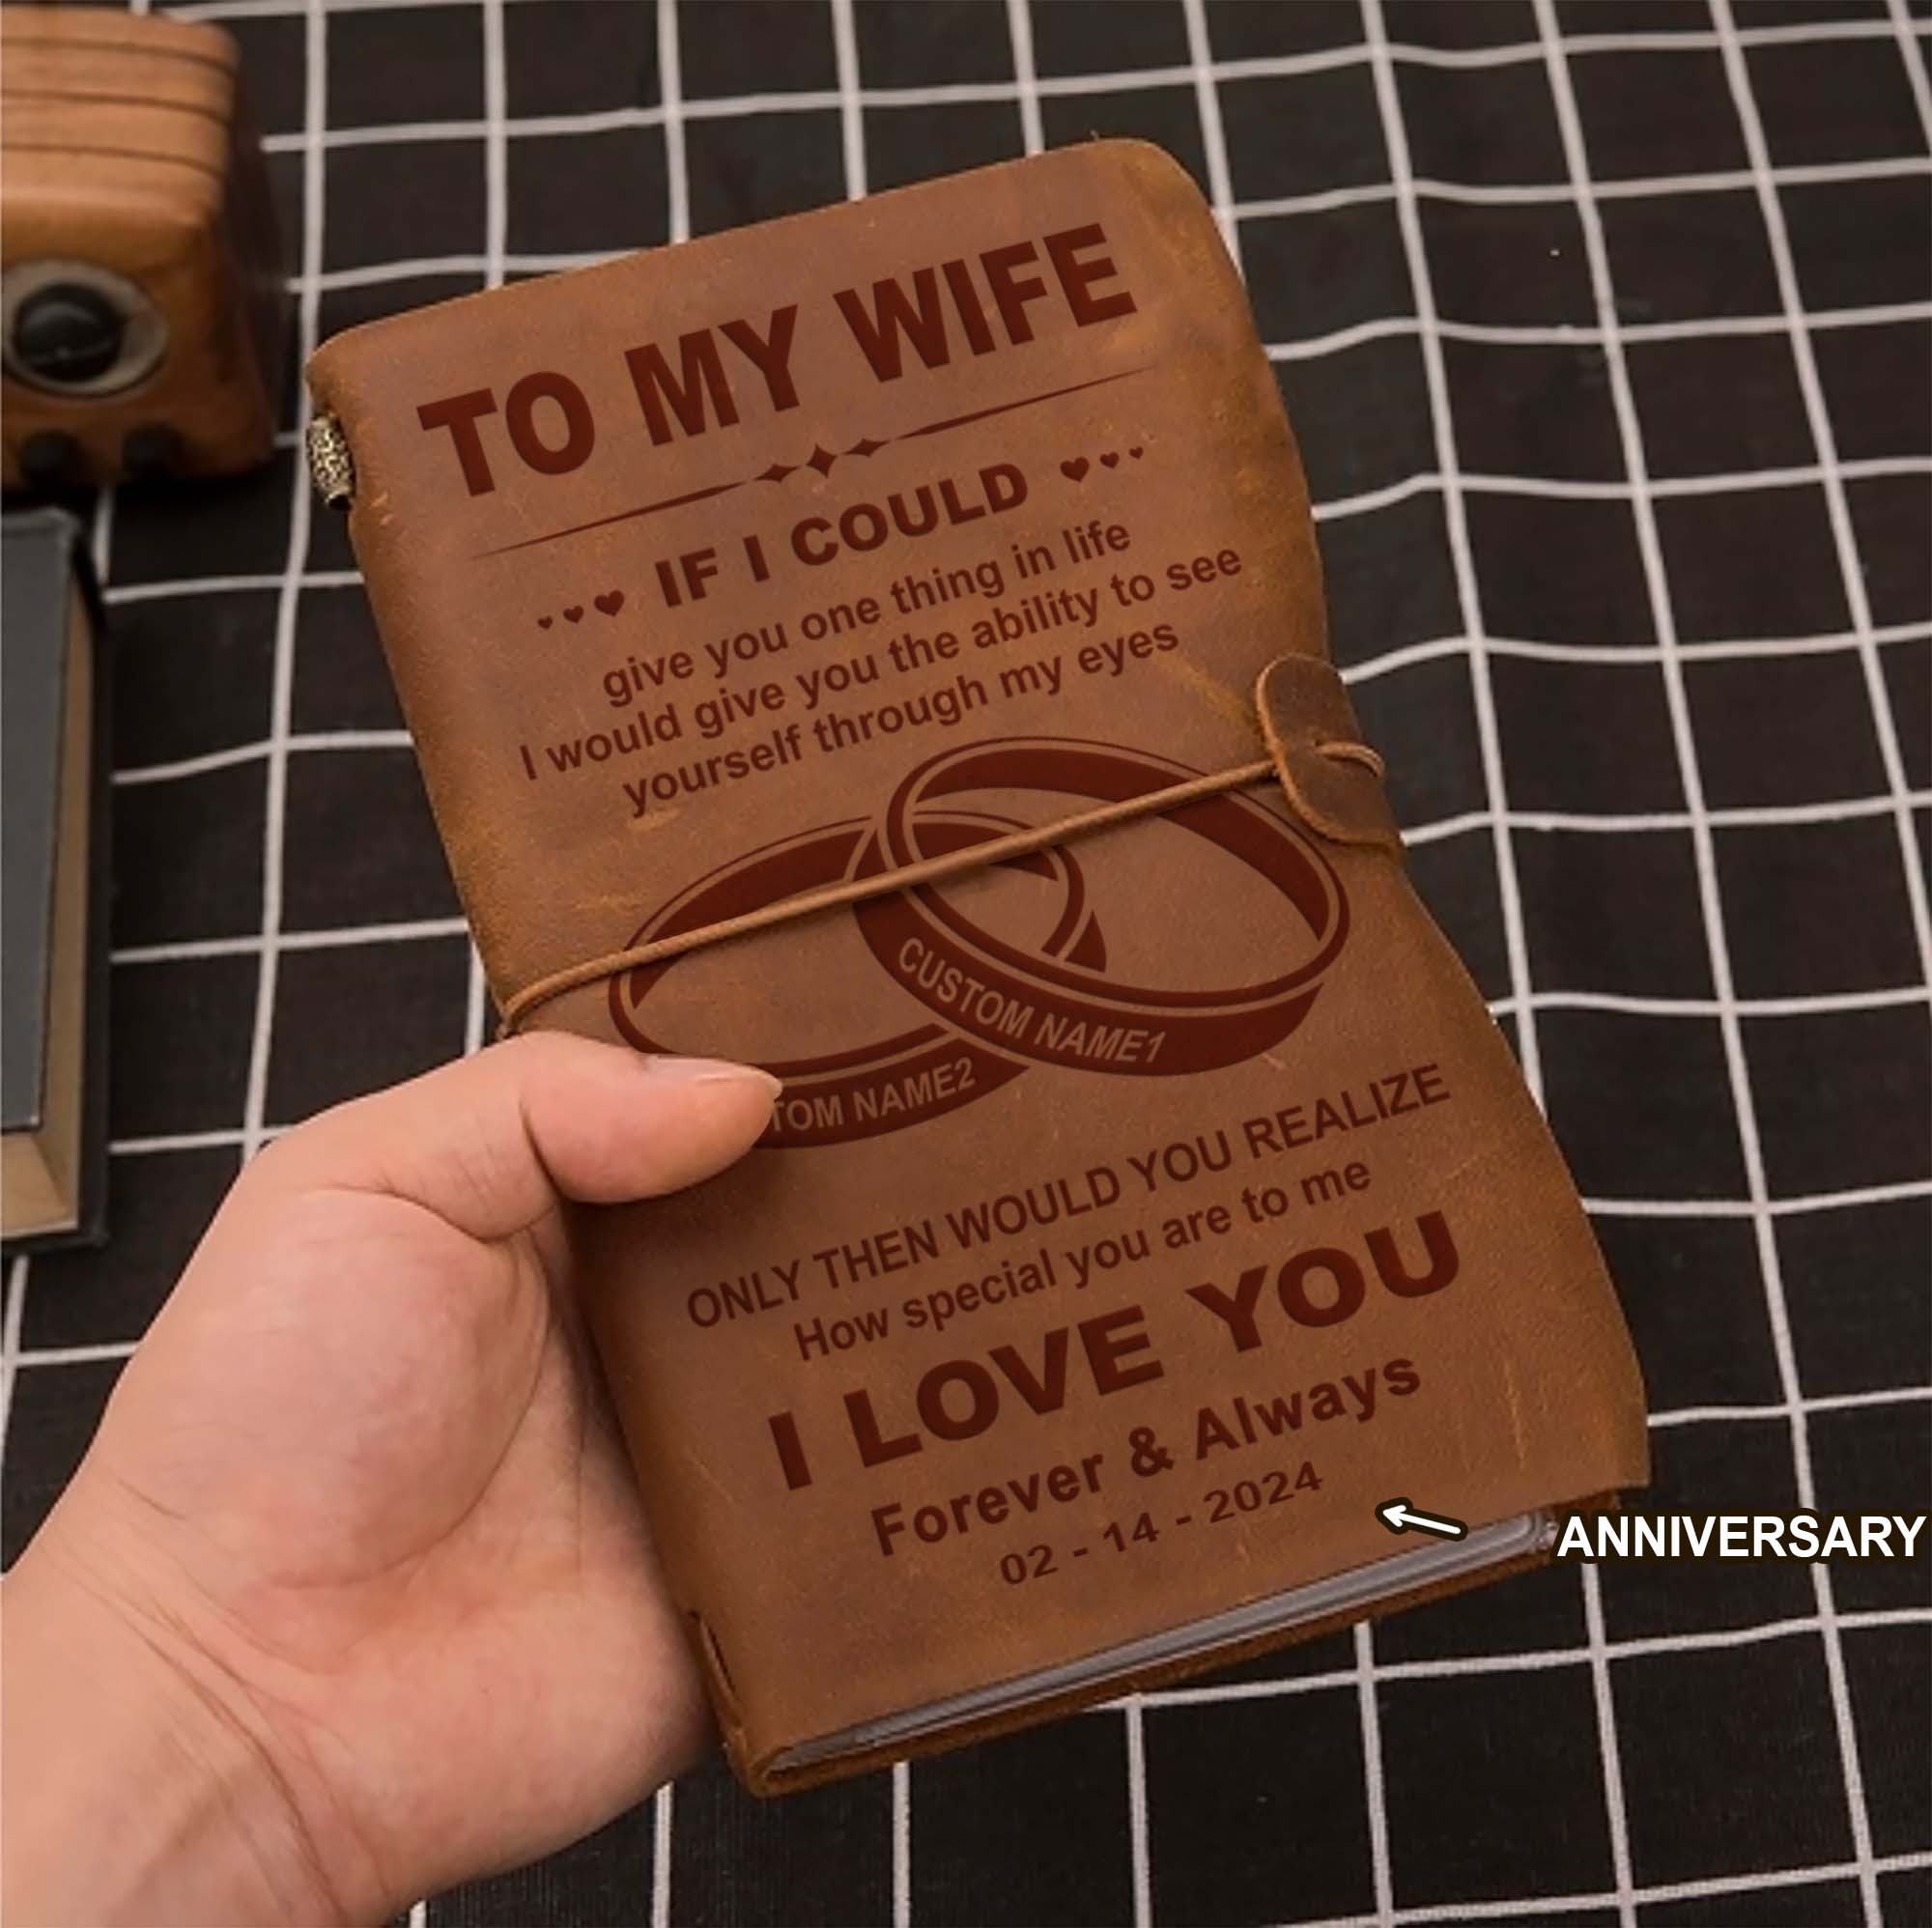 Perfect for anniversaries, birthdays, or just because-Vintage Journal Husband to wife- If I could give you one thing in life